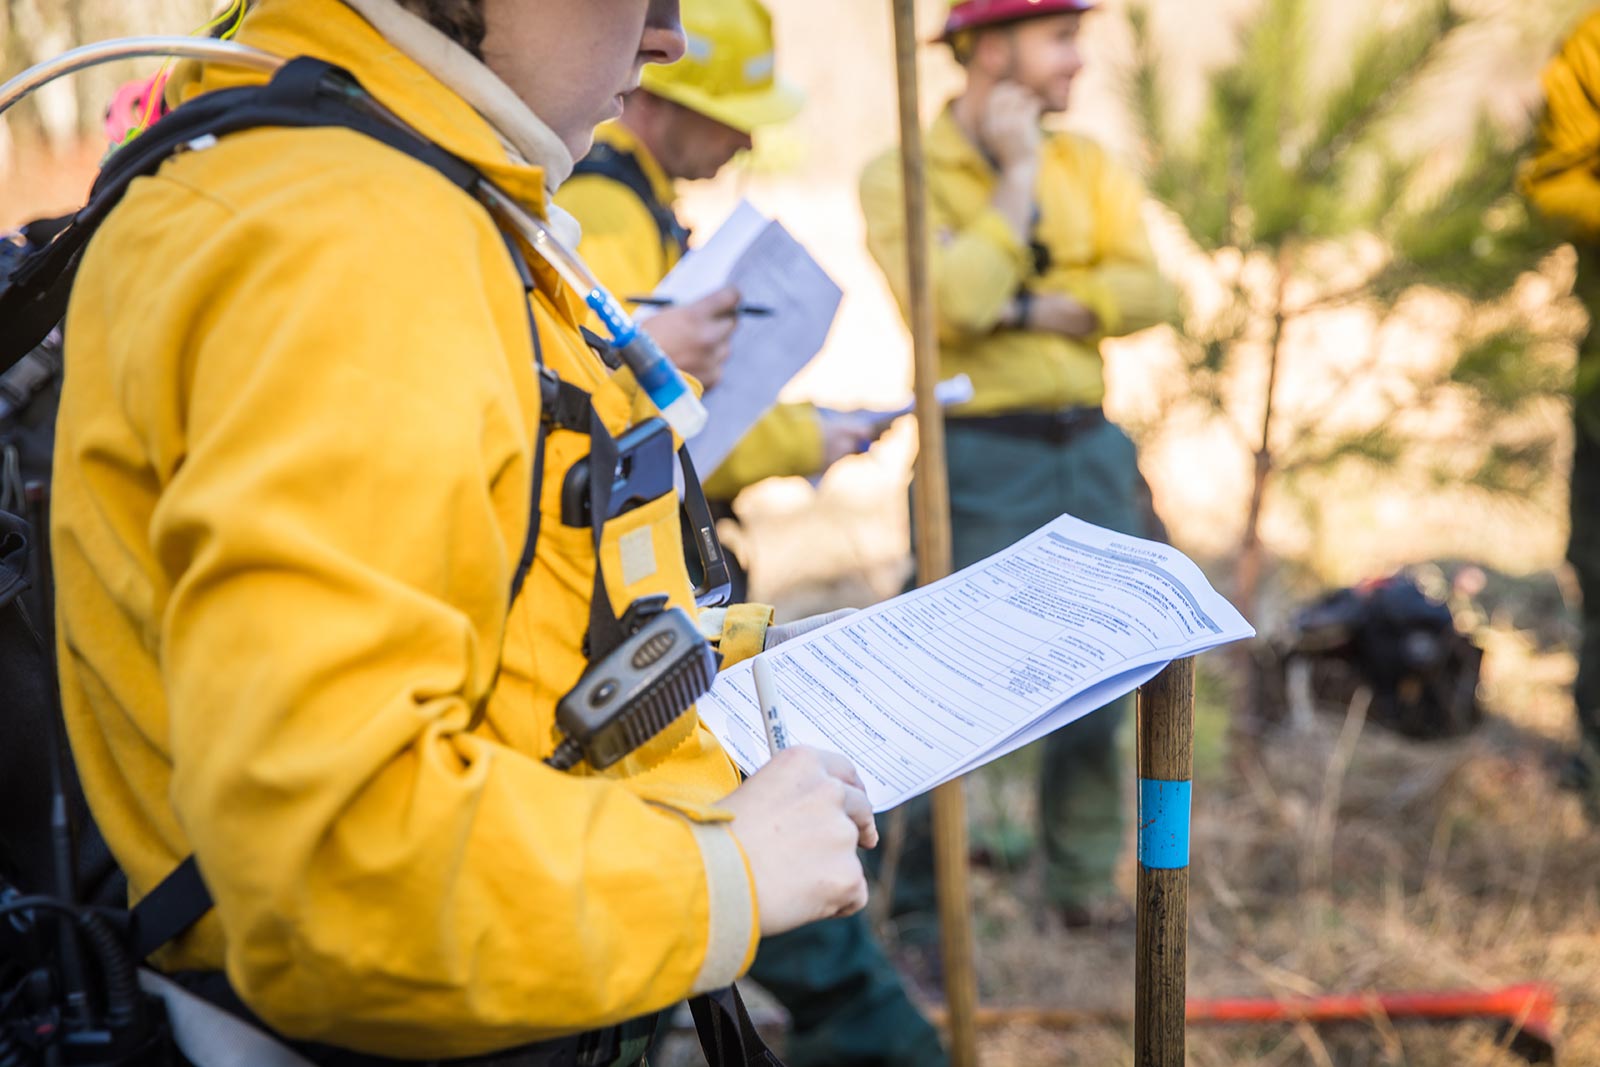 A DWR fire crew member reviews the day's prescribed burn plan.